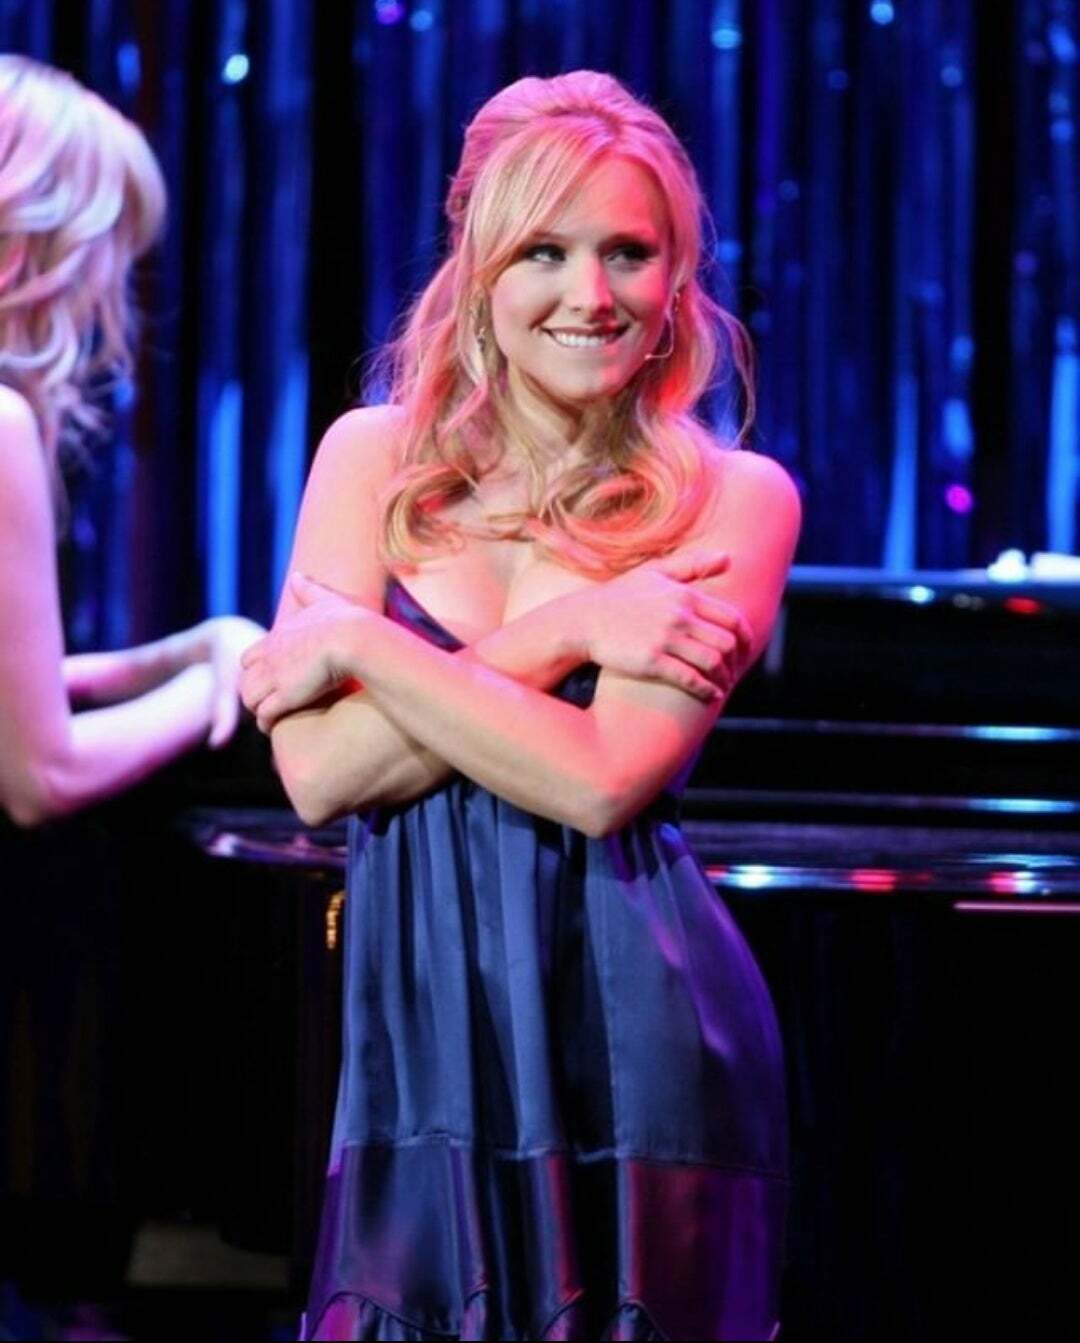 Kristen Bell getting undress like this would be sexy AF... I might embarrass myself by climaxing before we even fuck